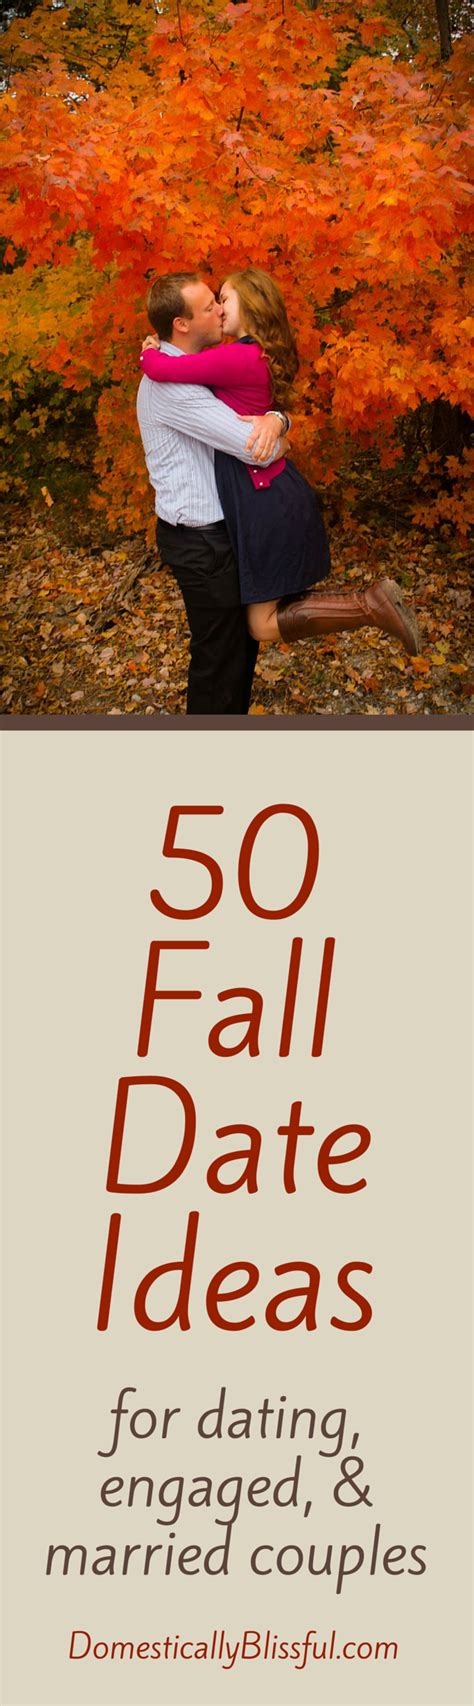 One of the most memorable things couples can do together (or one of the cheesiest date ideas) is to see a lame tourist icon, and laugh about it together. 50 Fall Date Ideas